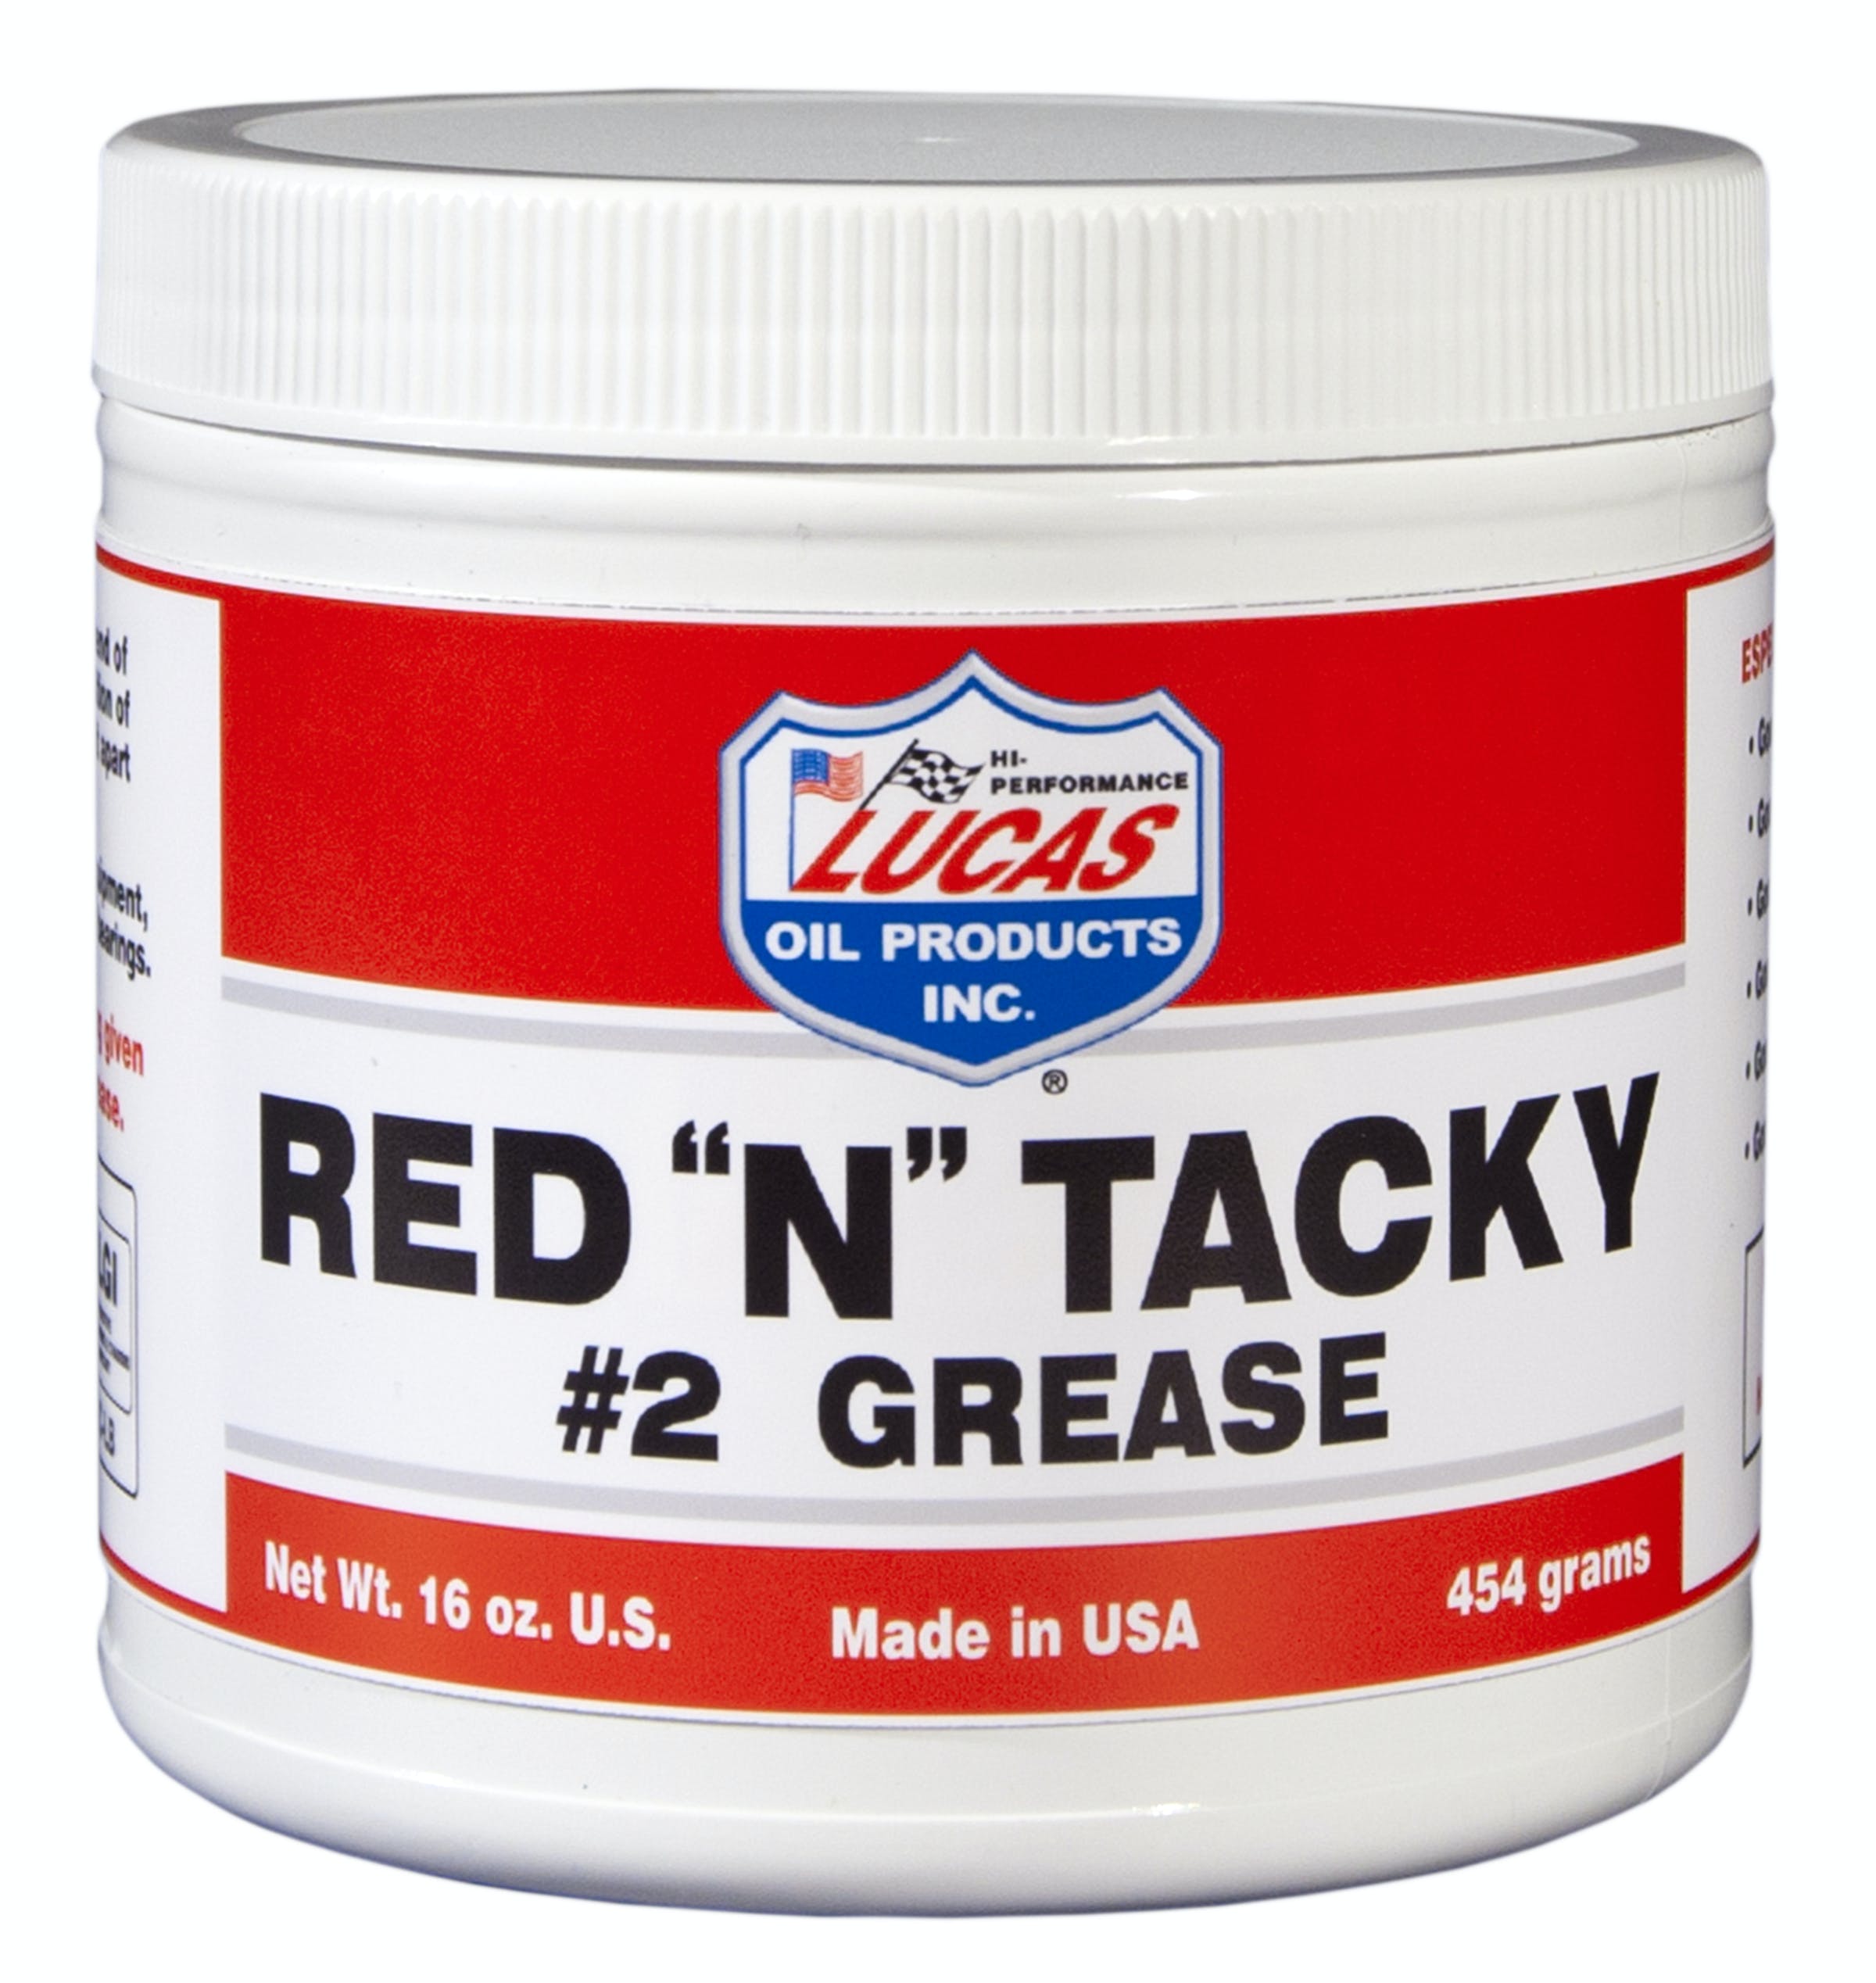 Lucas OIL Red N Tacky Grease 10574